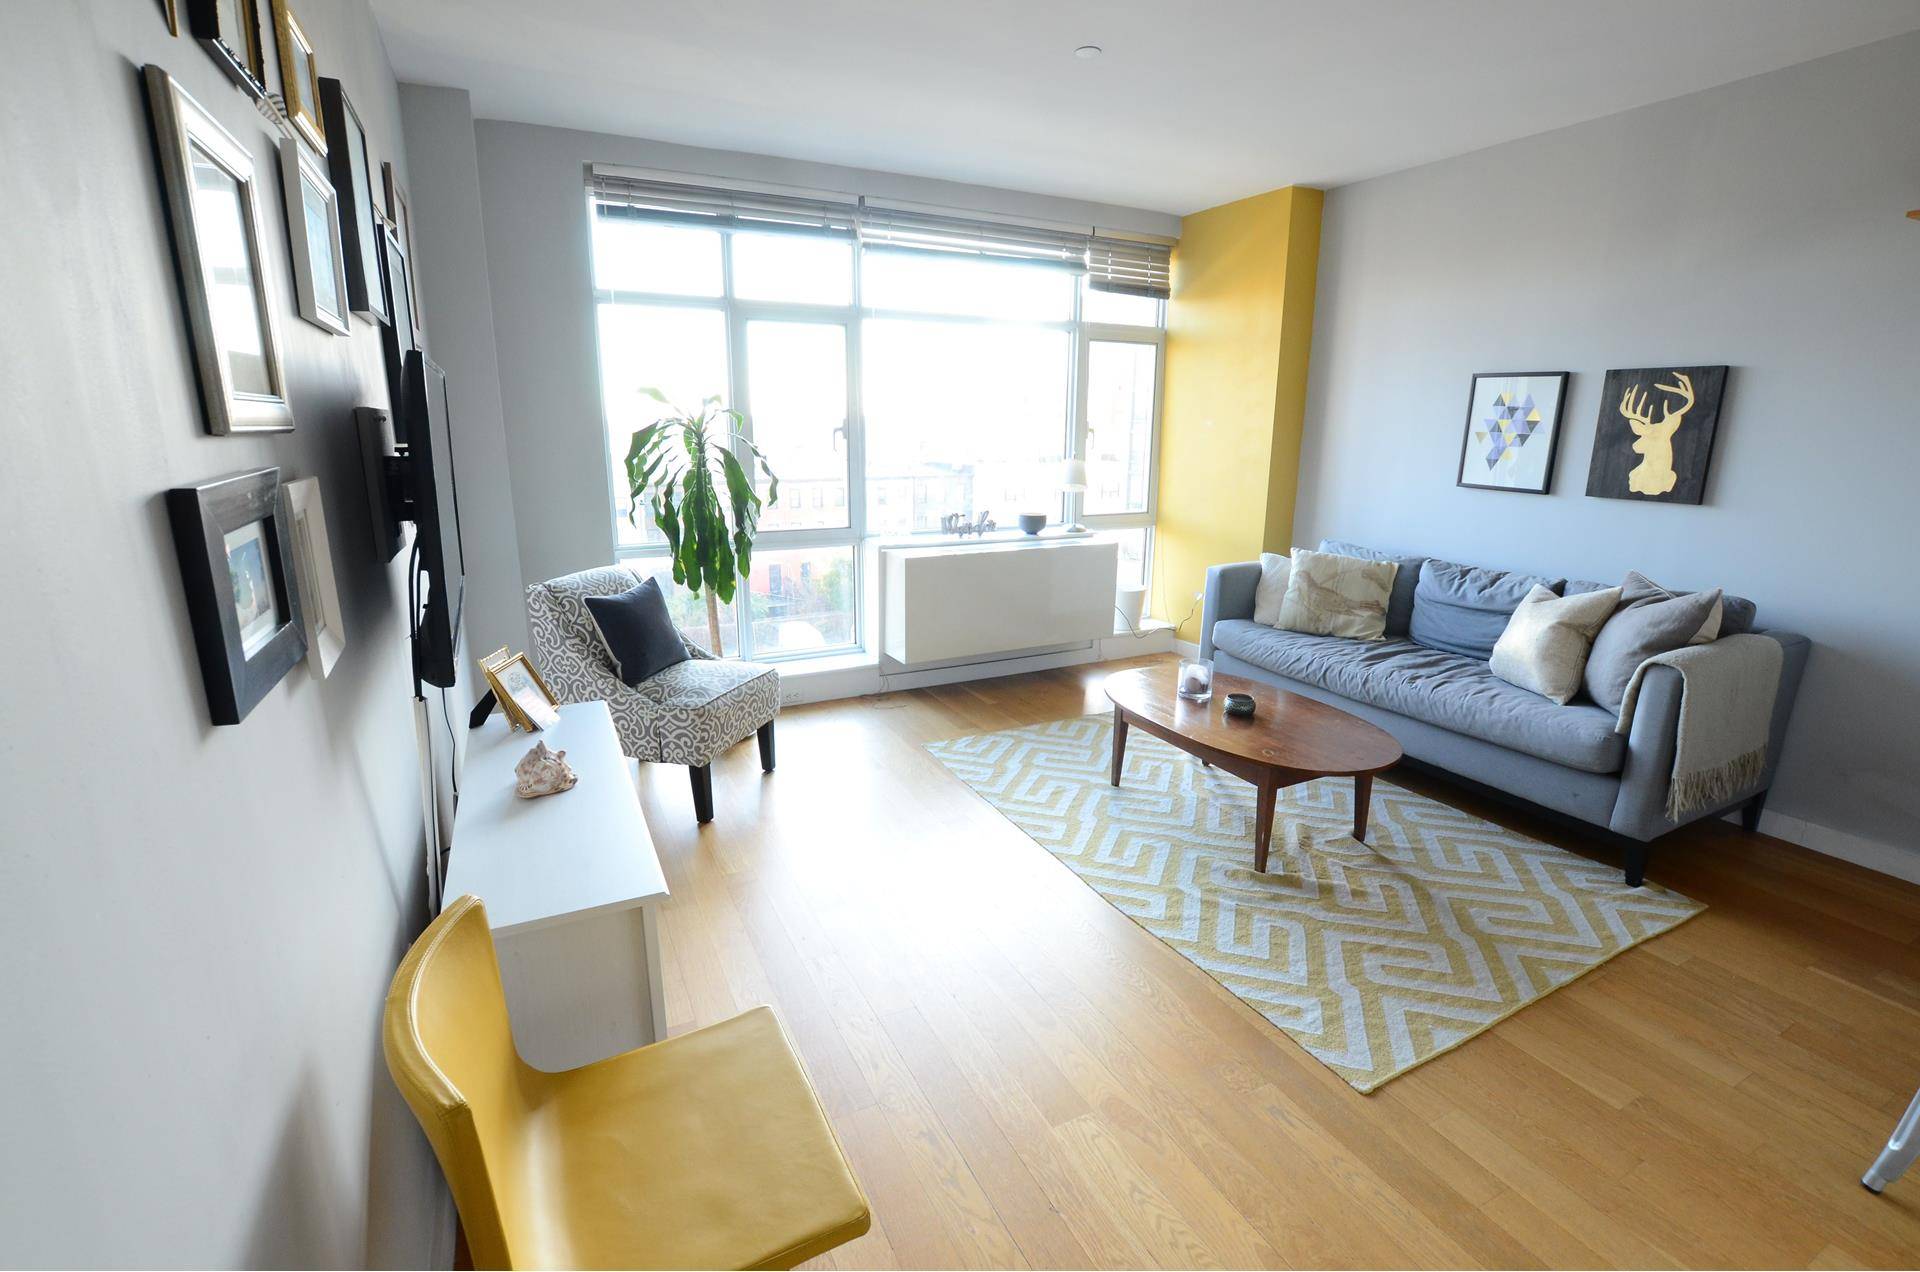 This well laid out, perfectly symmetrical fully furnished with West Elm furniture one bedroom residence at be schermerhorn's sought after South Tower is bathed in natural light through its full ...